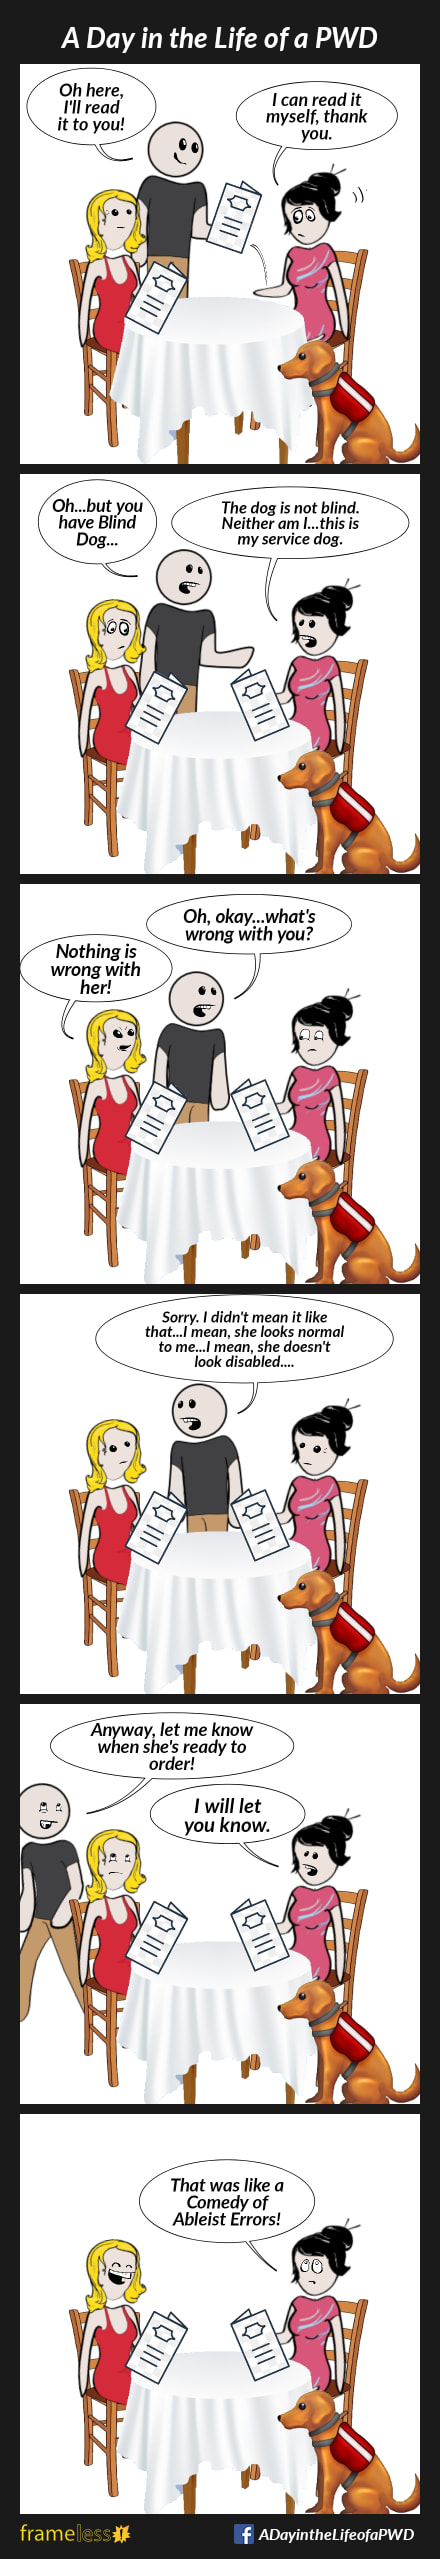 COMIC STRIP 
A Day in the Life of a PWD (Person With a Disability) 

Frame 1:
A woman and her friend are sitting at a restaurant table reading menus. The woman's service dog sits next to her.
WAITER (grabbing the woman's menu out of her hands): Oh, here, I'll read it to you!
WOMAN: I can read it myself, thank you.

Frame 2:
WAITER: Oh...but you have a Blind Dog...
WOMAN: The dog is not blind. Neither am I...this is my service dog.

Frame 3:
WAITER: Oh, okay. What's wrong with you?
FRIEND: Nothing is wrong with her!

Frame 4:
WAITER (turning to Friend): Sorry, I didn't mean it like that...I mean, she looks normal to me...I mean, she doesn't look disabled...

Frame 5:
WAITER (walking away): Anyway, let me know when she is ready to order...
WOMAN: I will let you know.
Friend rolls her eyes.

Frame 6:
WOMAN: (rolling her eyes): That was like a Comedy of Ableist Errors!
Friend laughs.